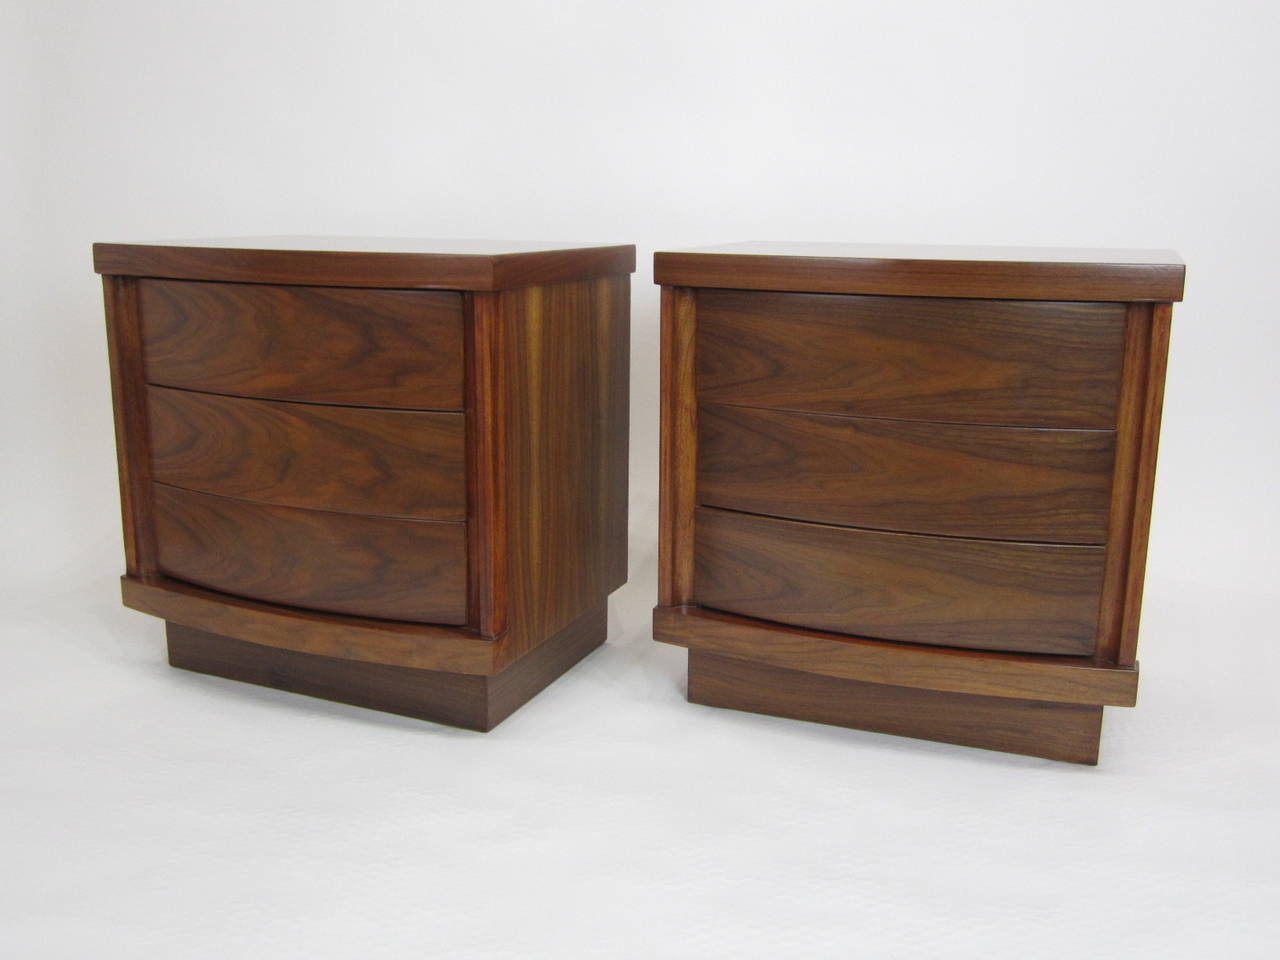 Pair of side tables each with three curved-front drawers and tops. Recessed plinth and touch-latch drawers. Finely finished inside and out. Sold as pair.